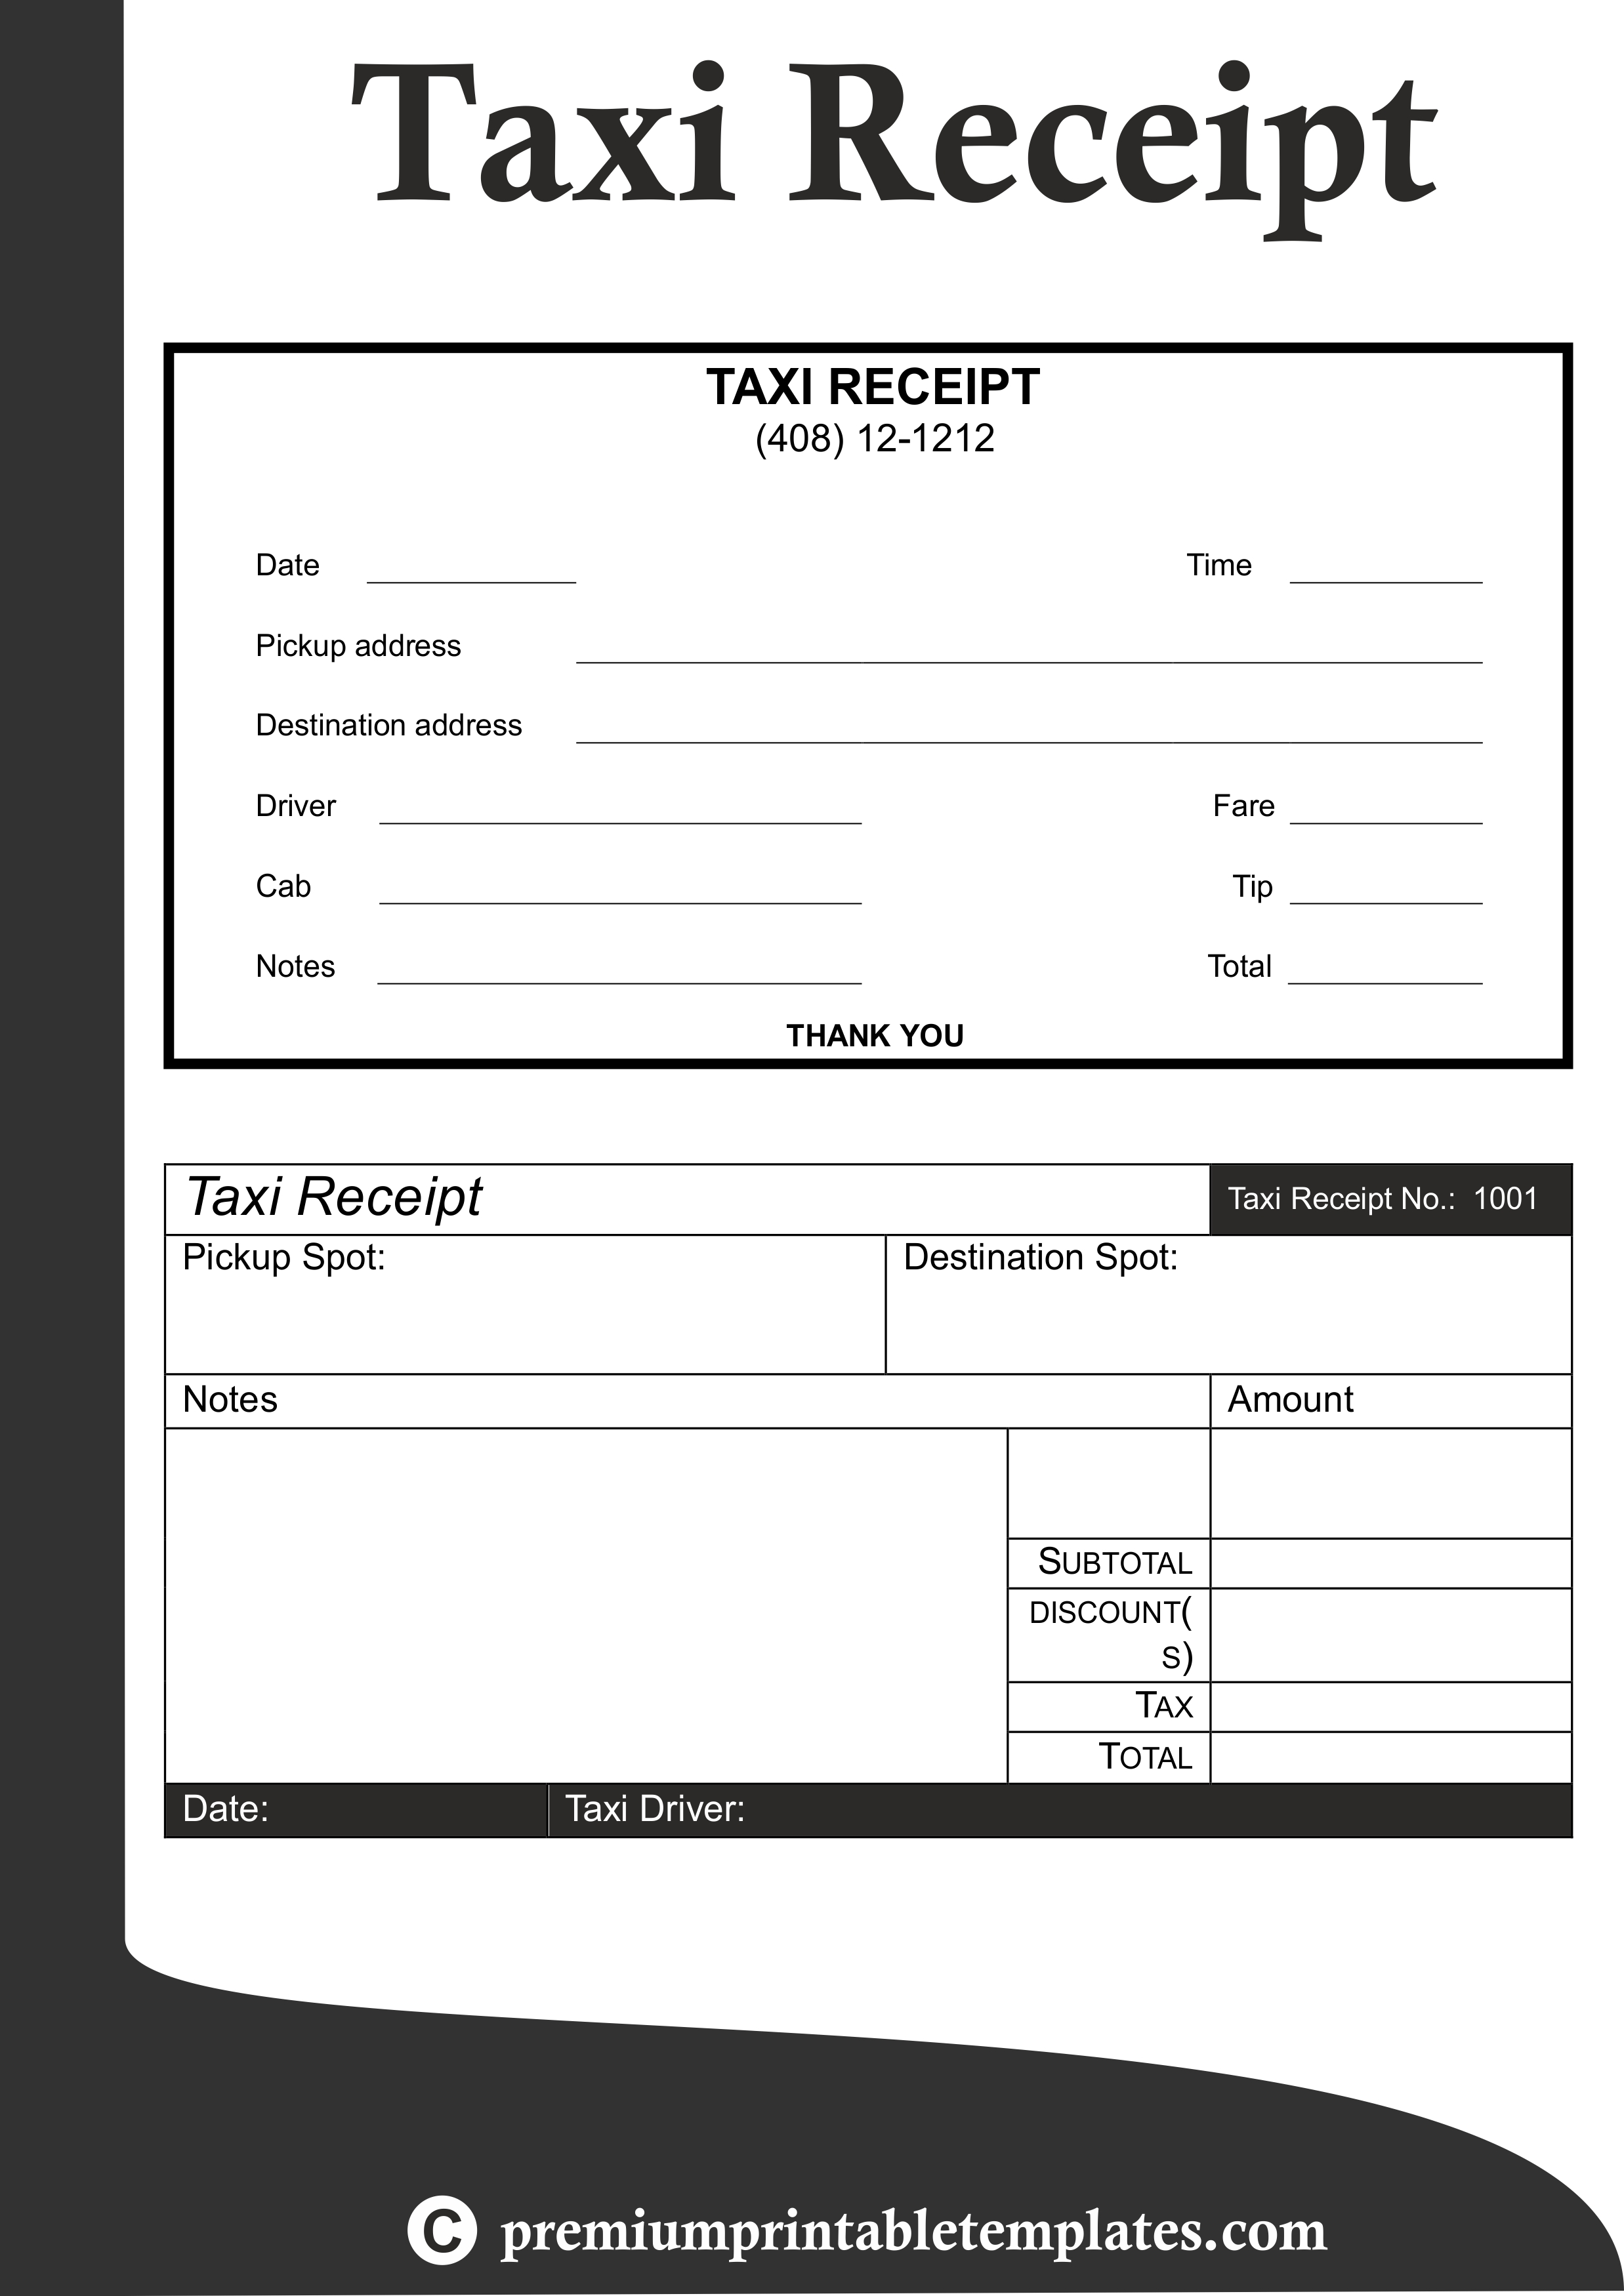 Rental For Taxi Invoice Invoice Template Ideas